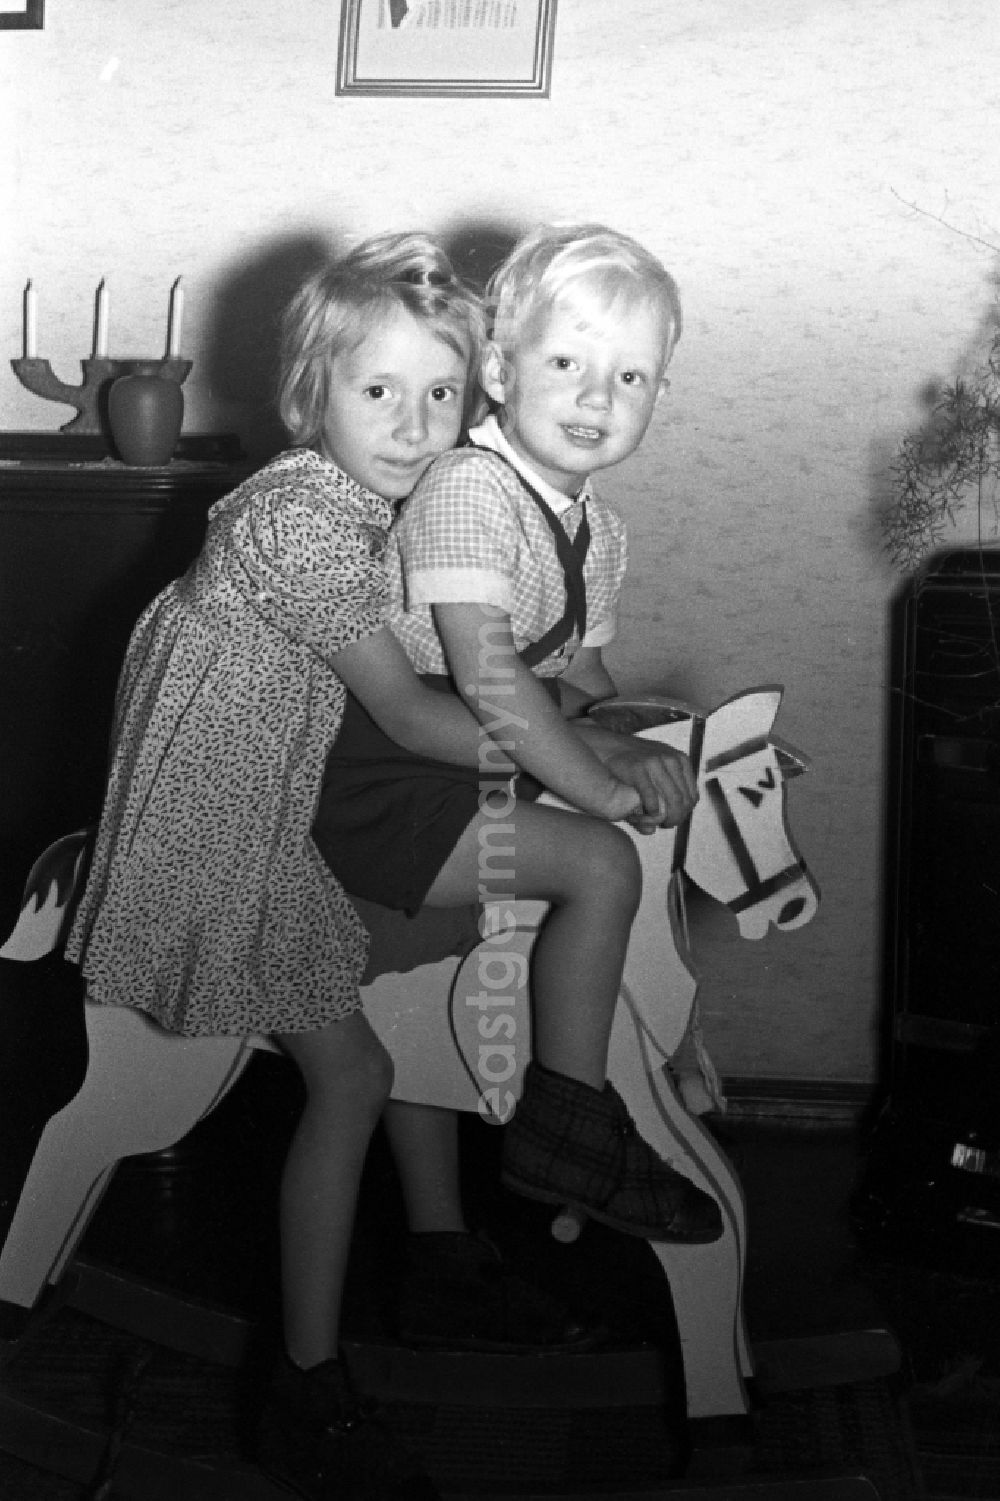 GDR photo archive: Merseburg - Two children sit on a rocking horse of wood in Merseburg in the federal state Saxony-Anhalt in Germany